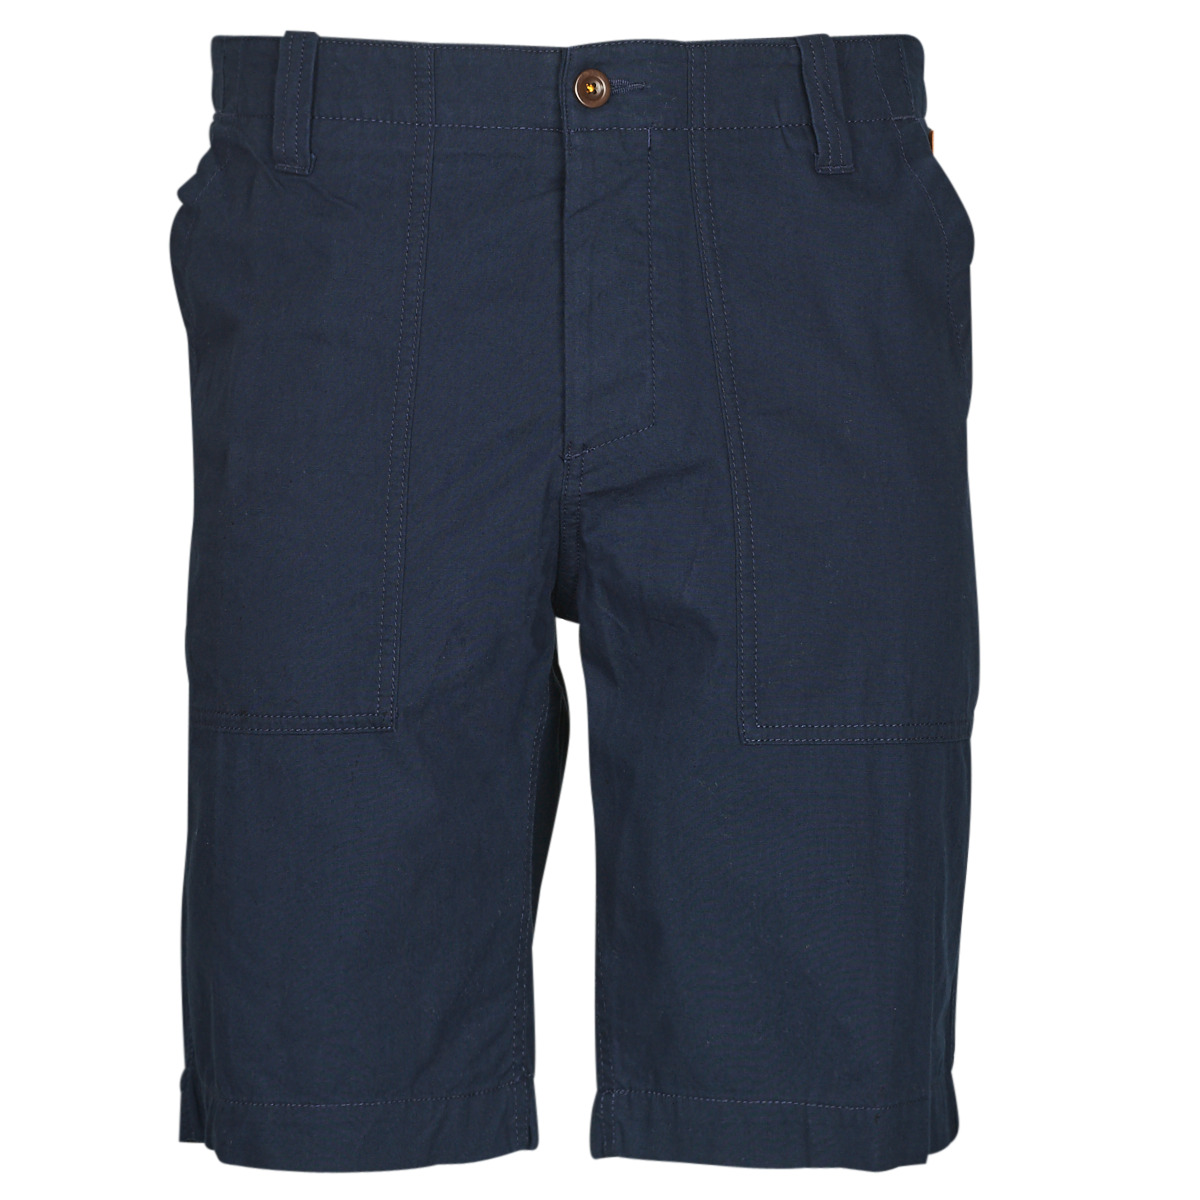 Timberland Marine WORK FOR THE FUTURE - ROC FATIGUE SHORT STRAIGHT QbZw4Syn